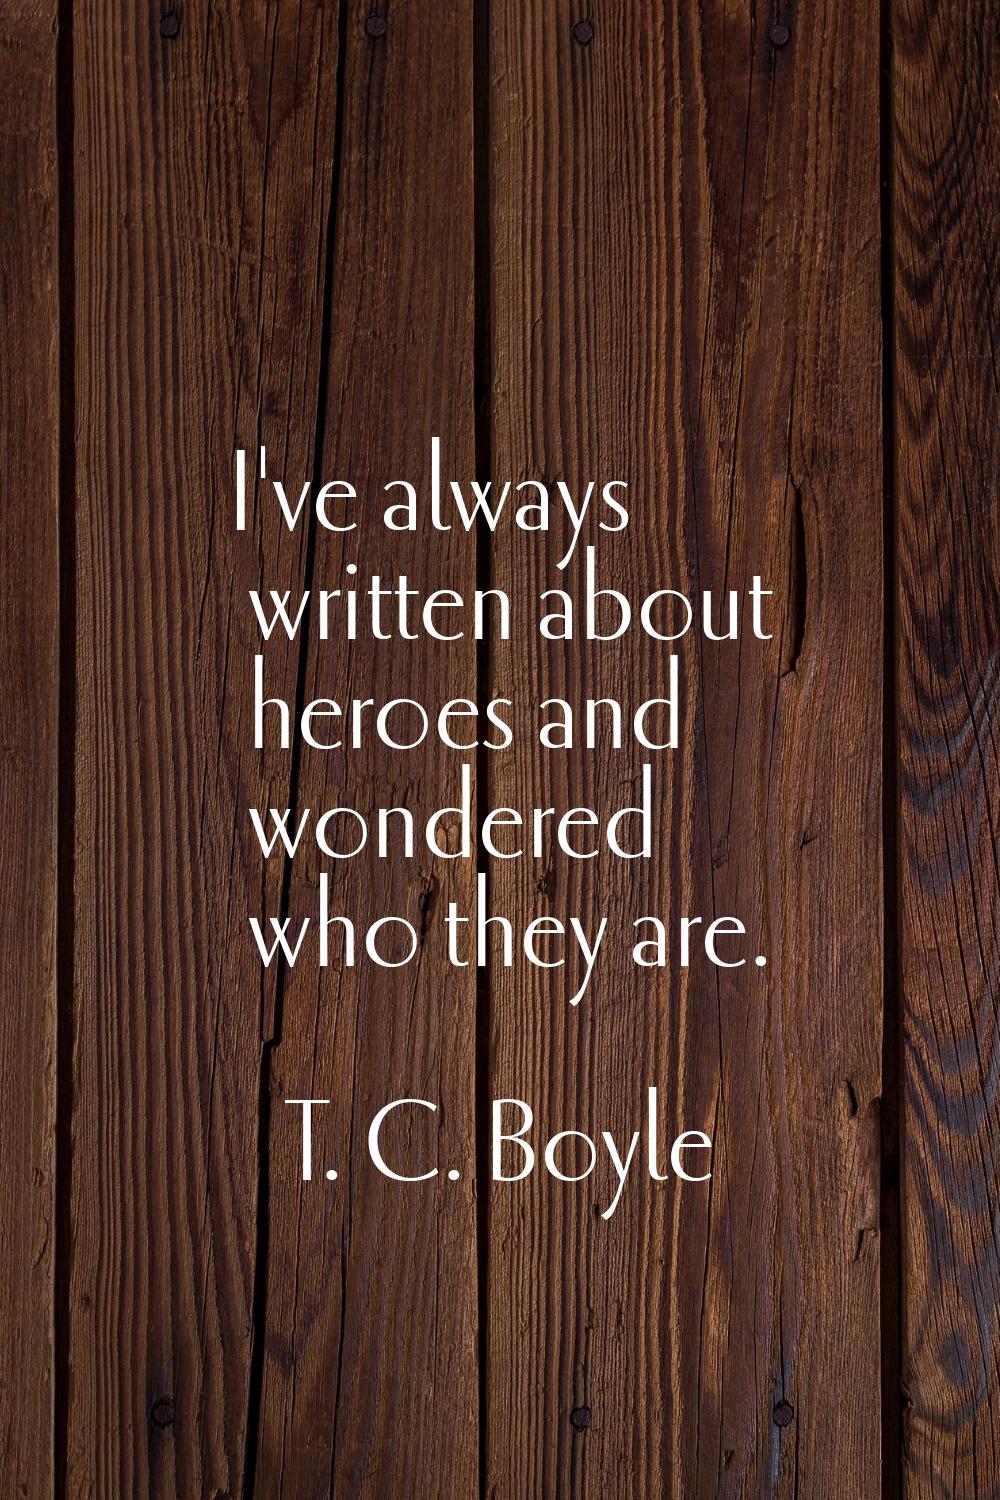 I've always written about heroes and wondered who they are.